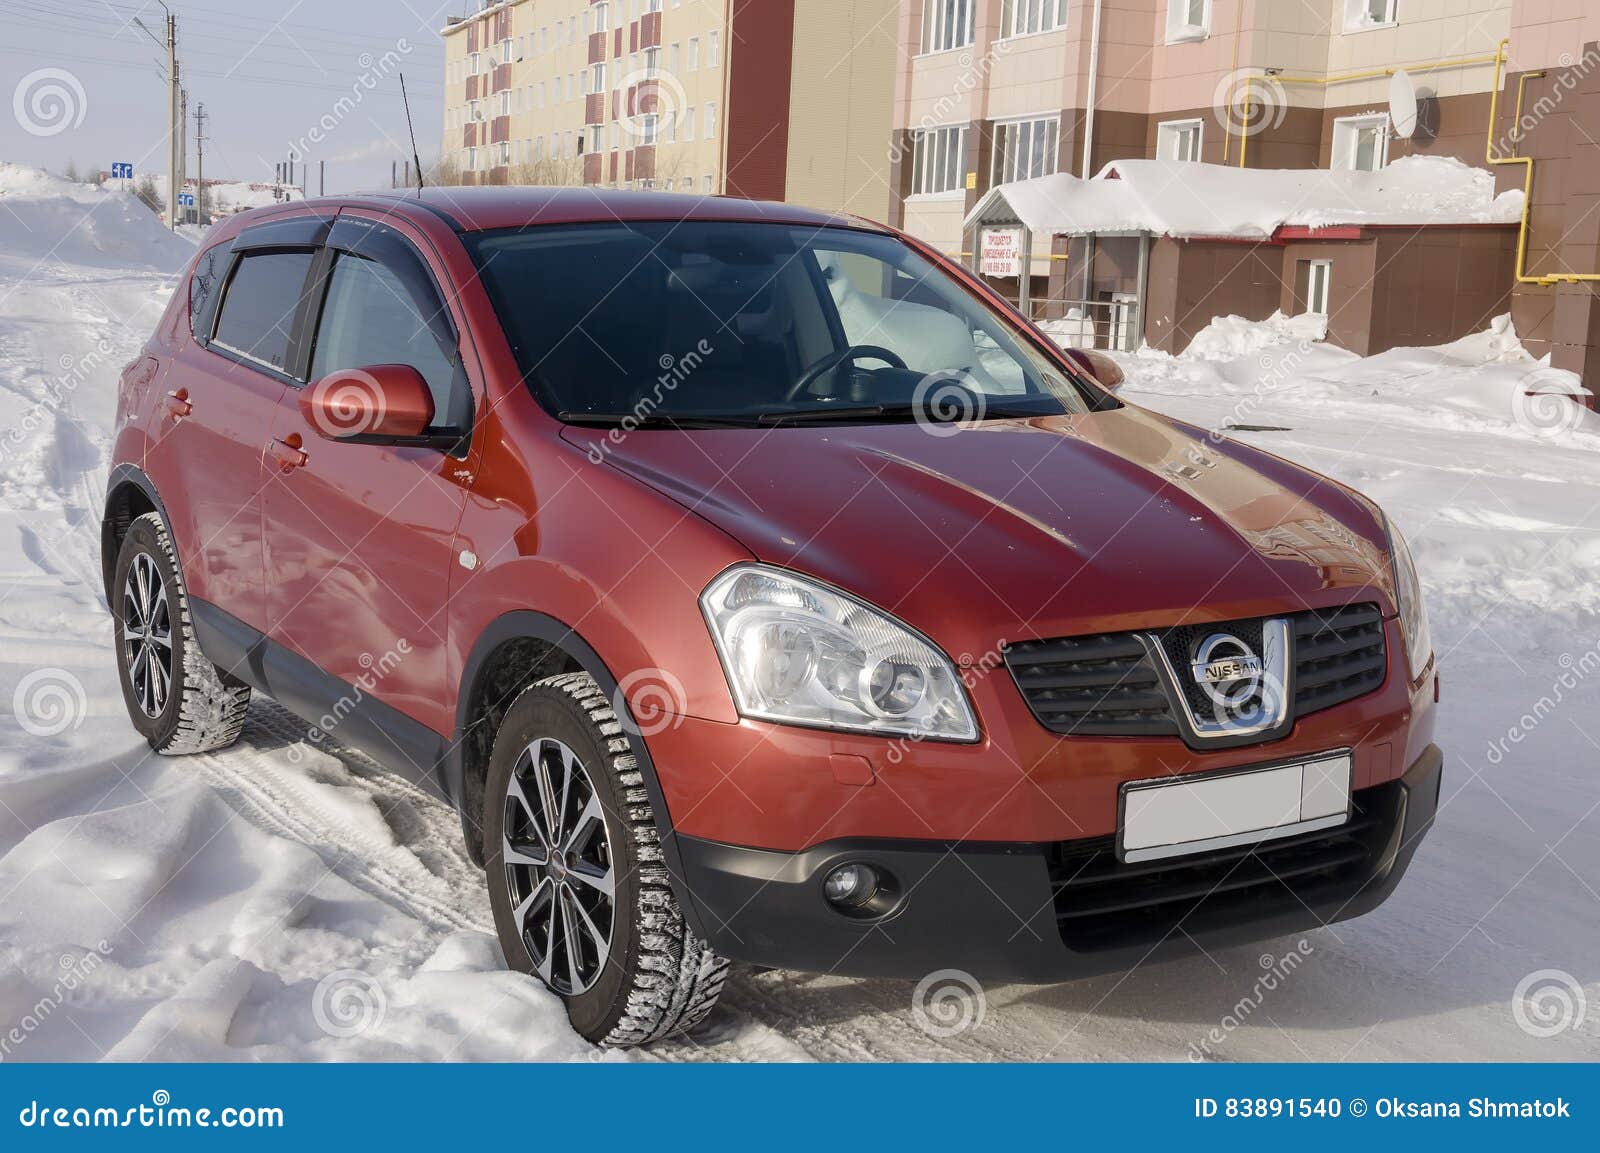 Nissan Qashqai in Red Color. this is Crossover that Combines Modark Design and Hatchback Refinement with Functionality Editorial Image - Image of functionality: 83891540